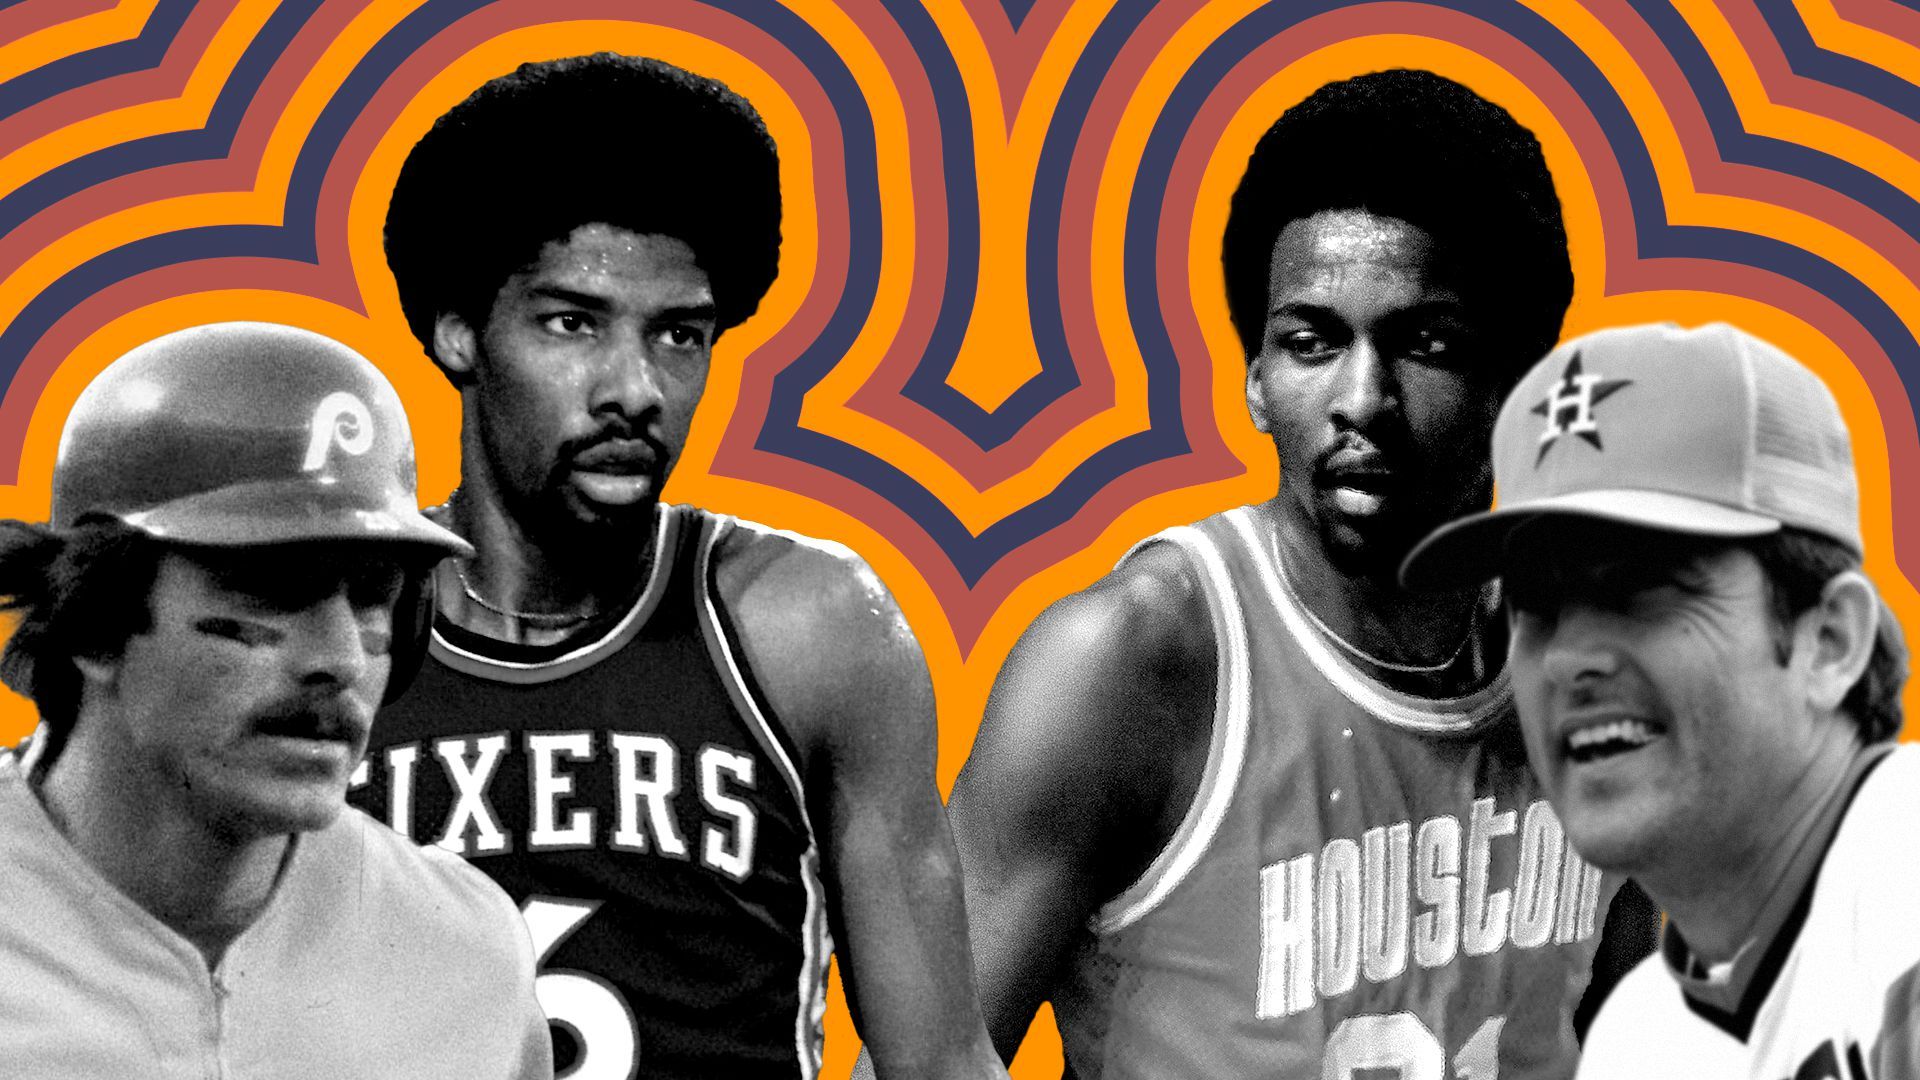 Photo illustration of Mike Schmidt, Julius Erving, Moses Malone and Nolan Ryan with multicolored lines surrounding them